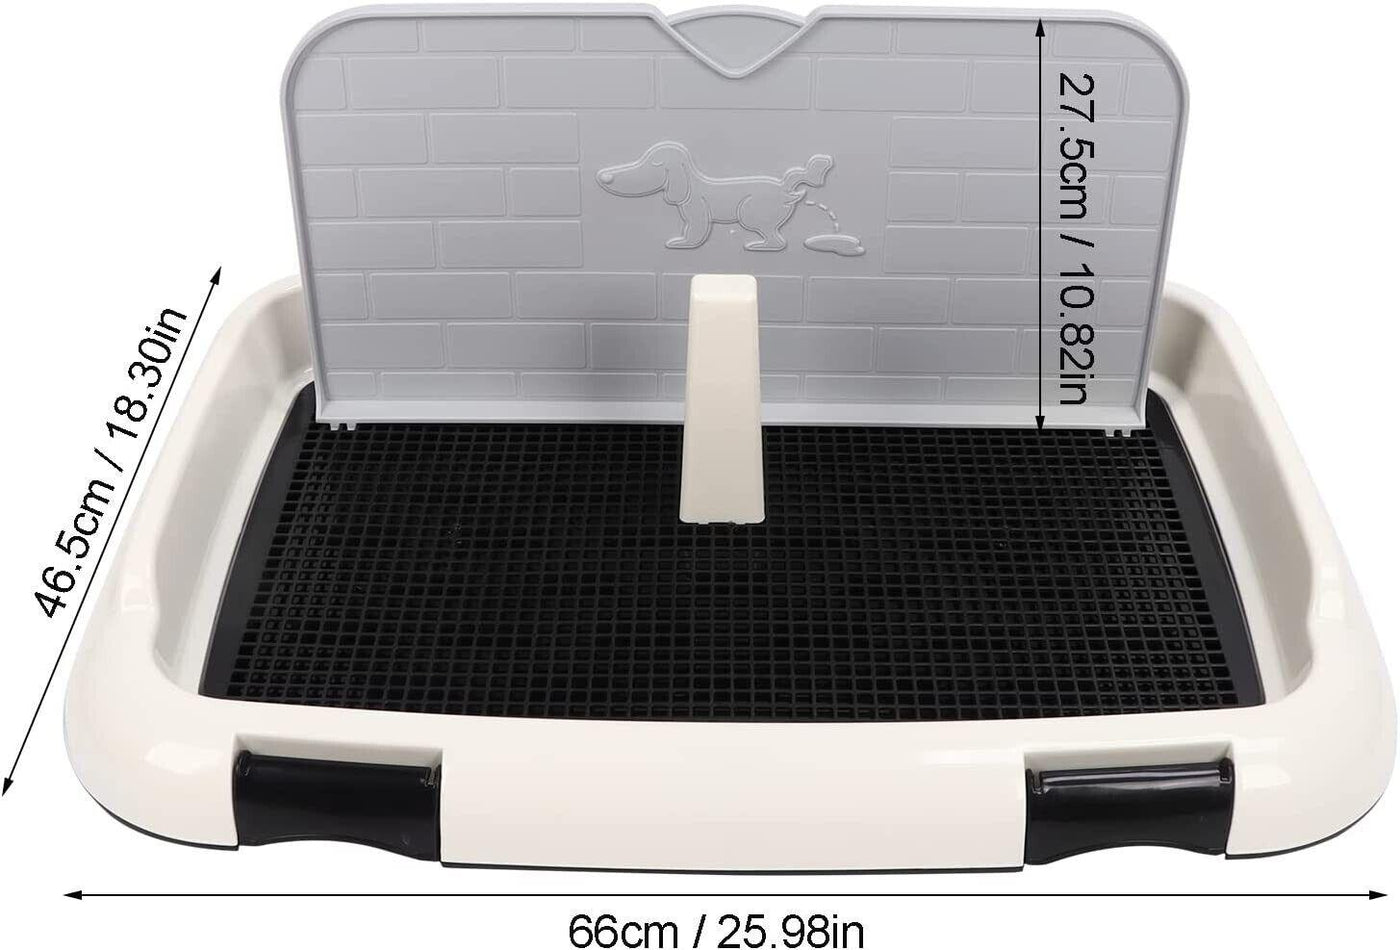 Dog Training Toilet Potty Tray for Collecting Dog Urine and Poop - Massive Discounts